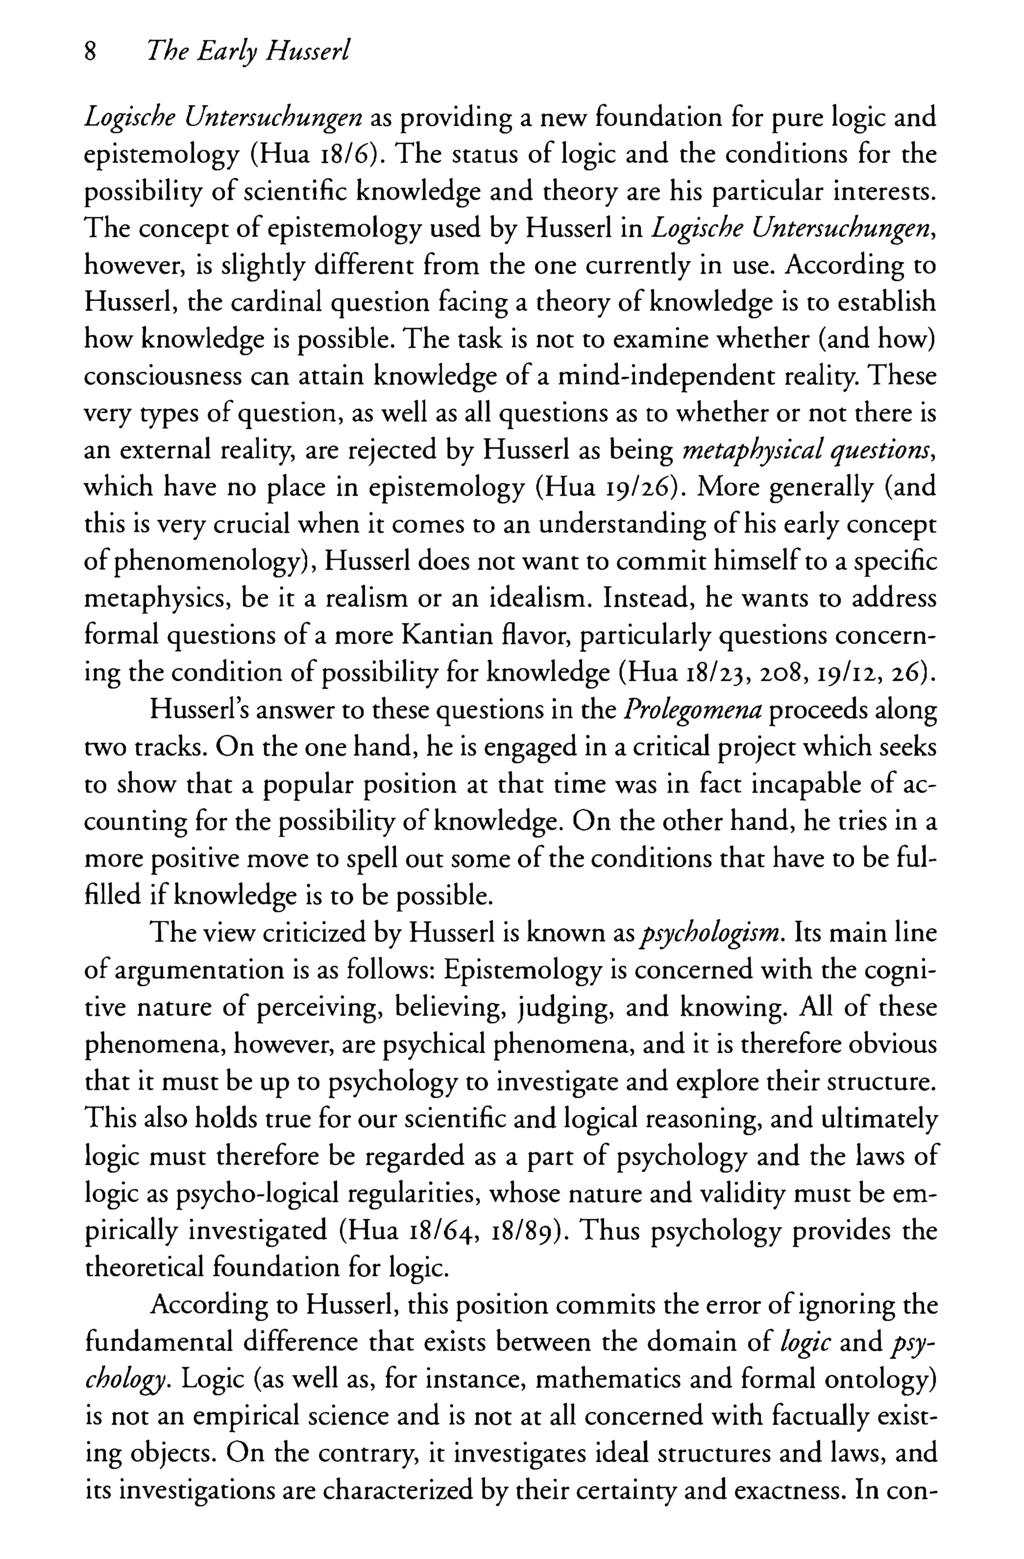 8 The Early Husserl Logische Untersuchungen as providing a new foundation for pure logic and epistemology (Hua 18/6).